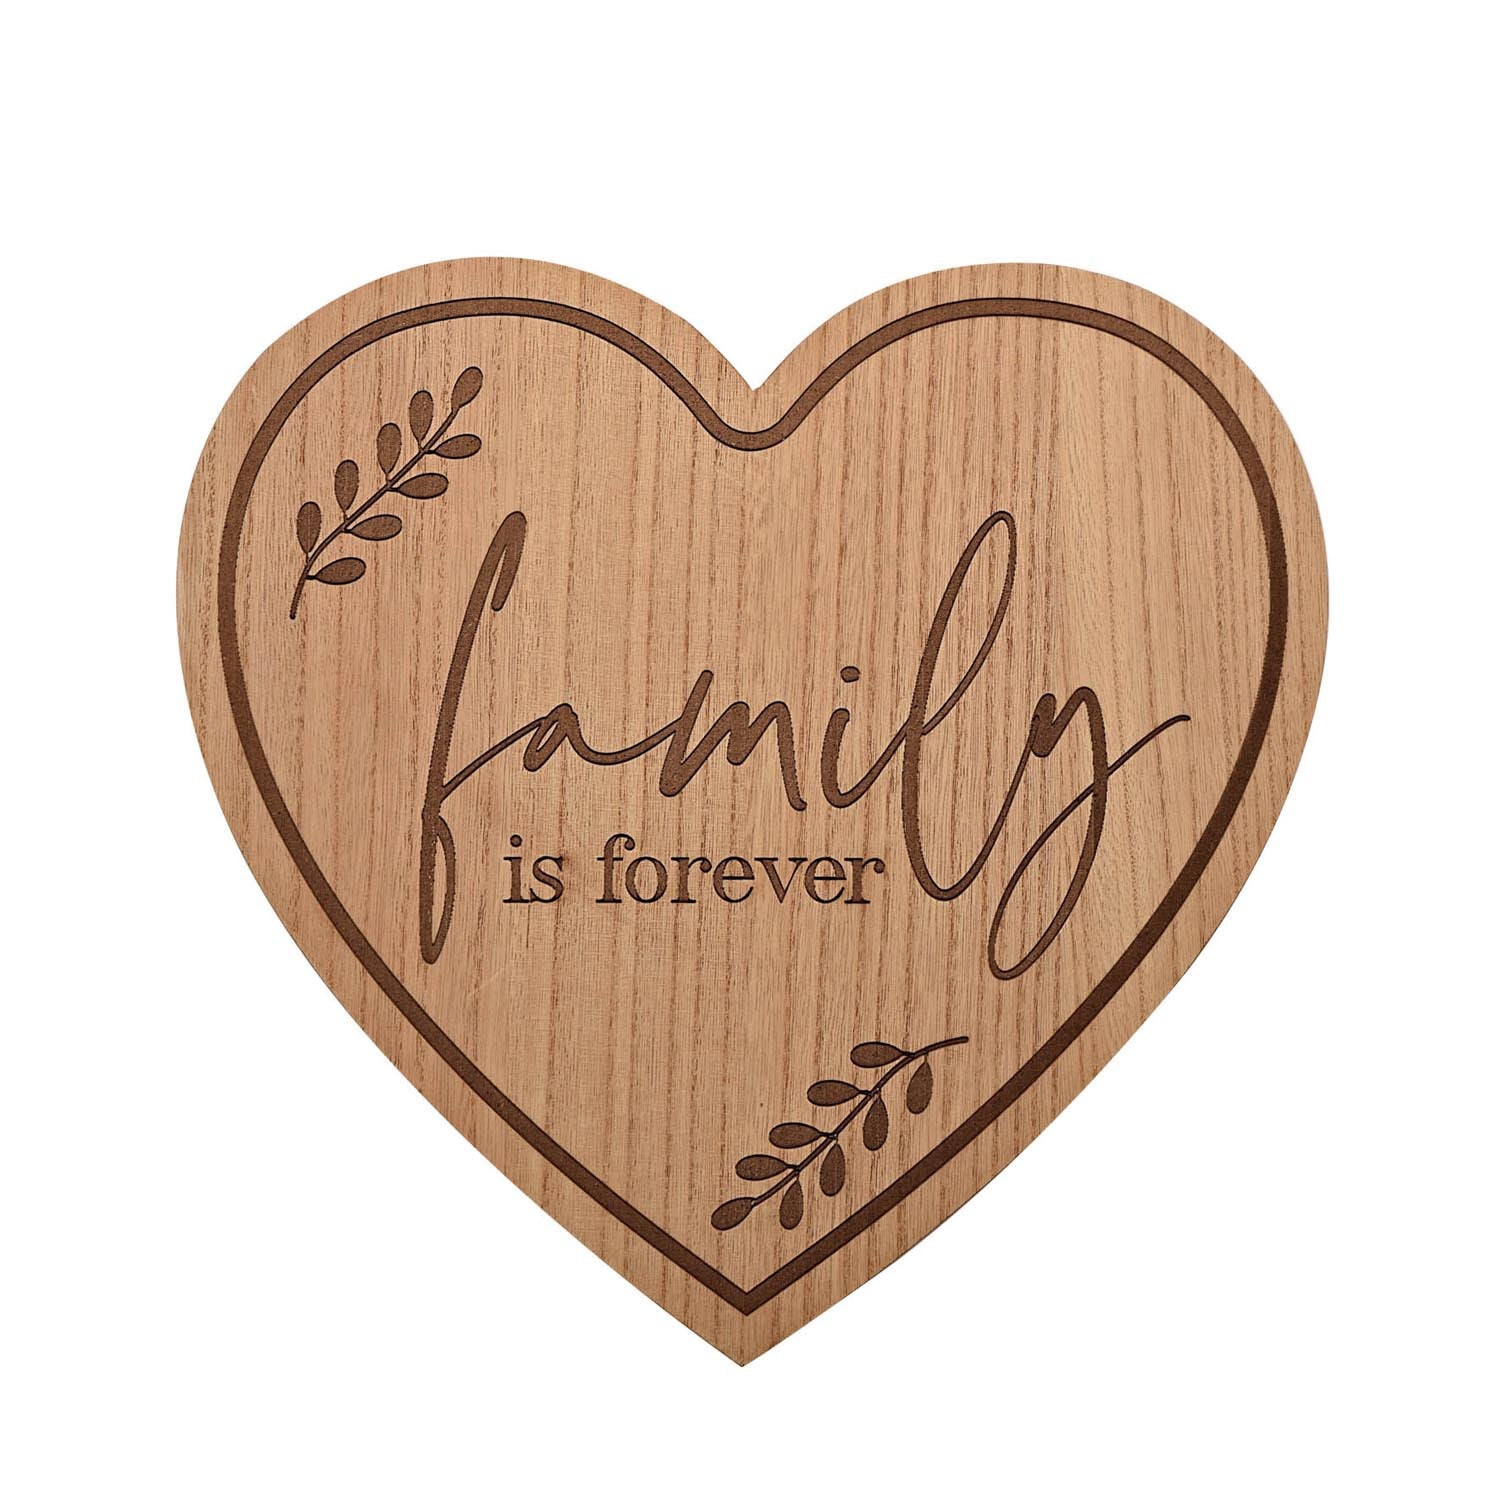 Moments Moments Wooden Heart Plaque - Family Forever 30cm 1 Shaws Department Stores